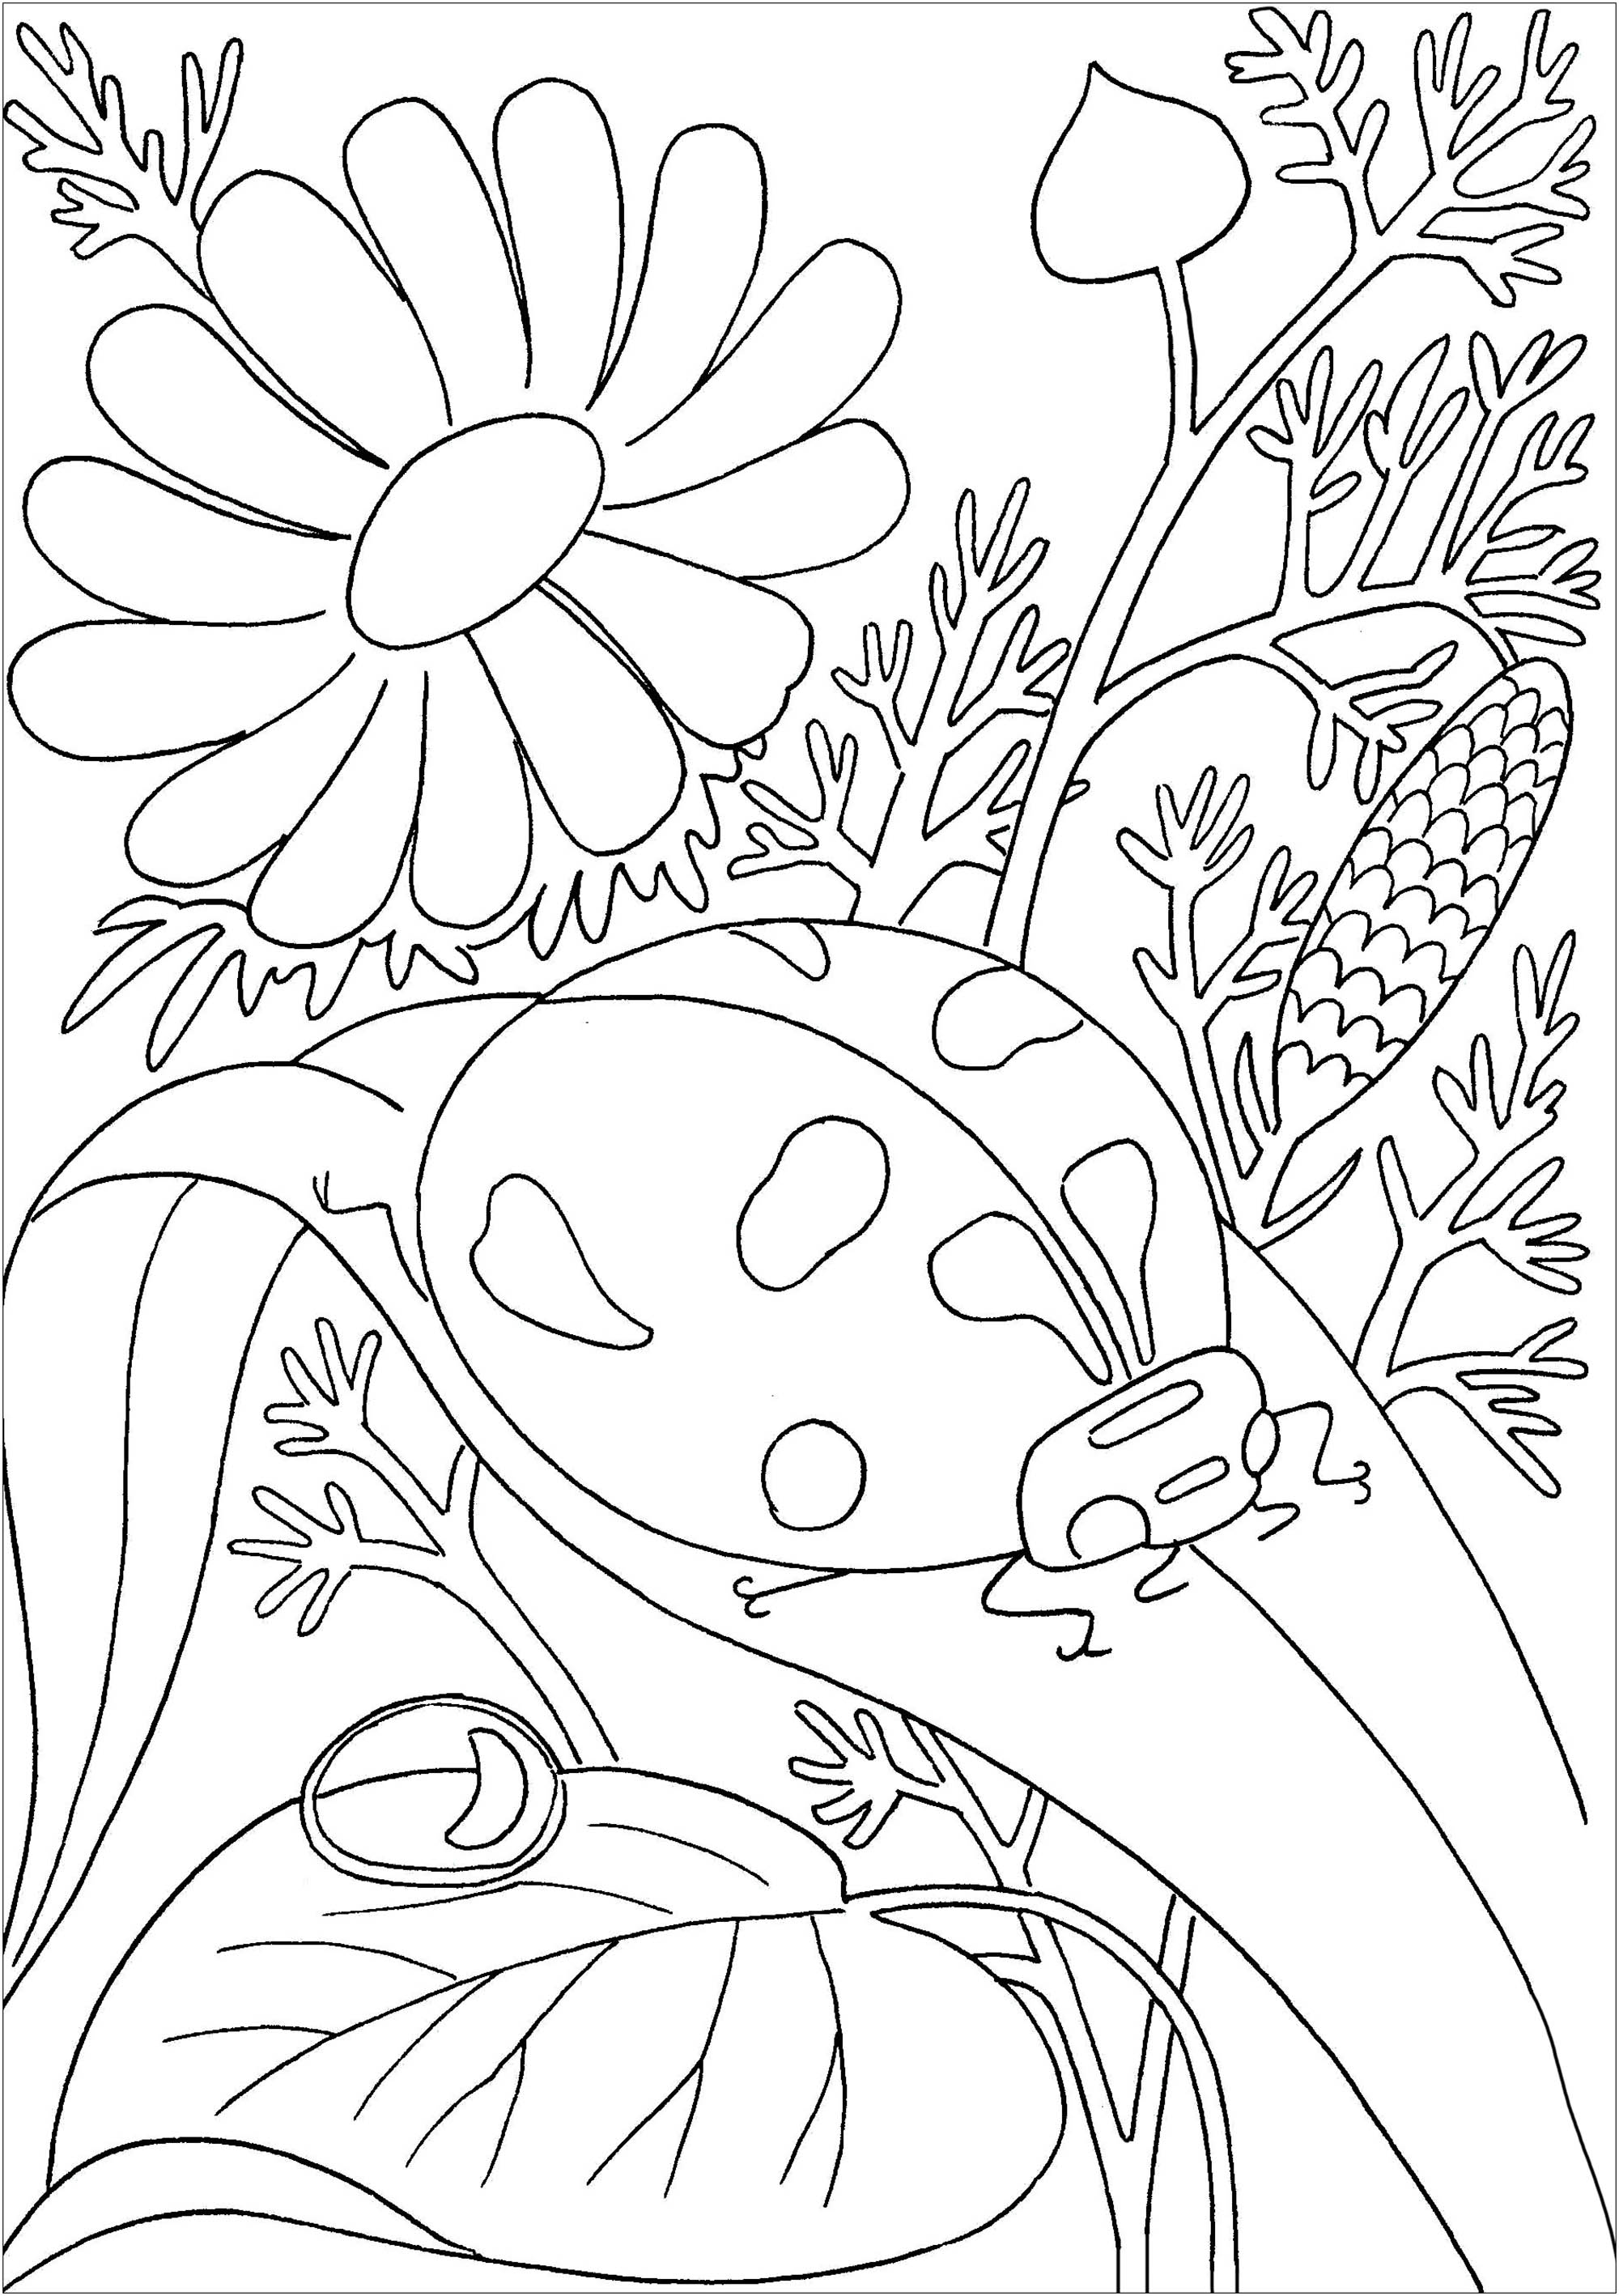 Download Ladybug on a leave - Butterflies & insects Adult Coloring Pages